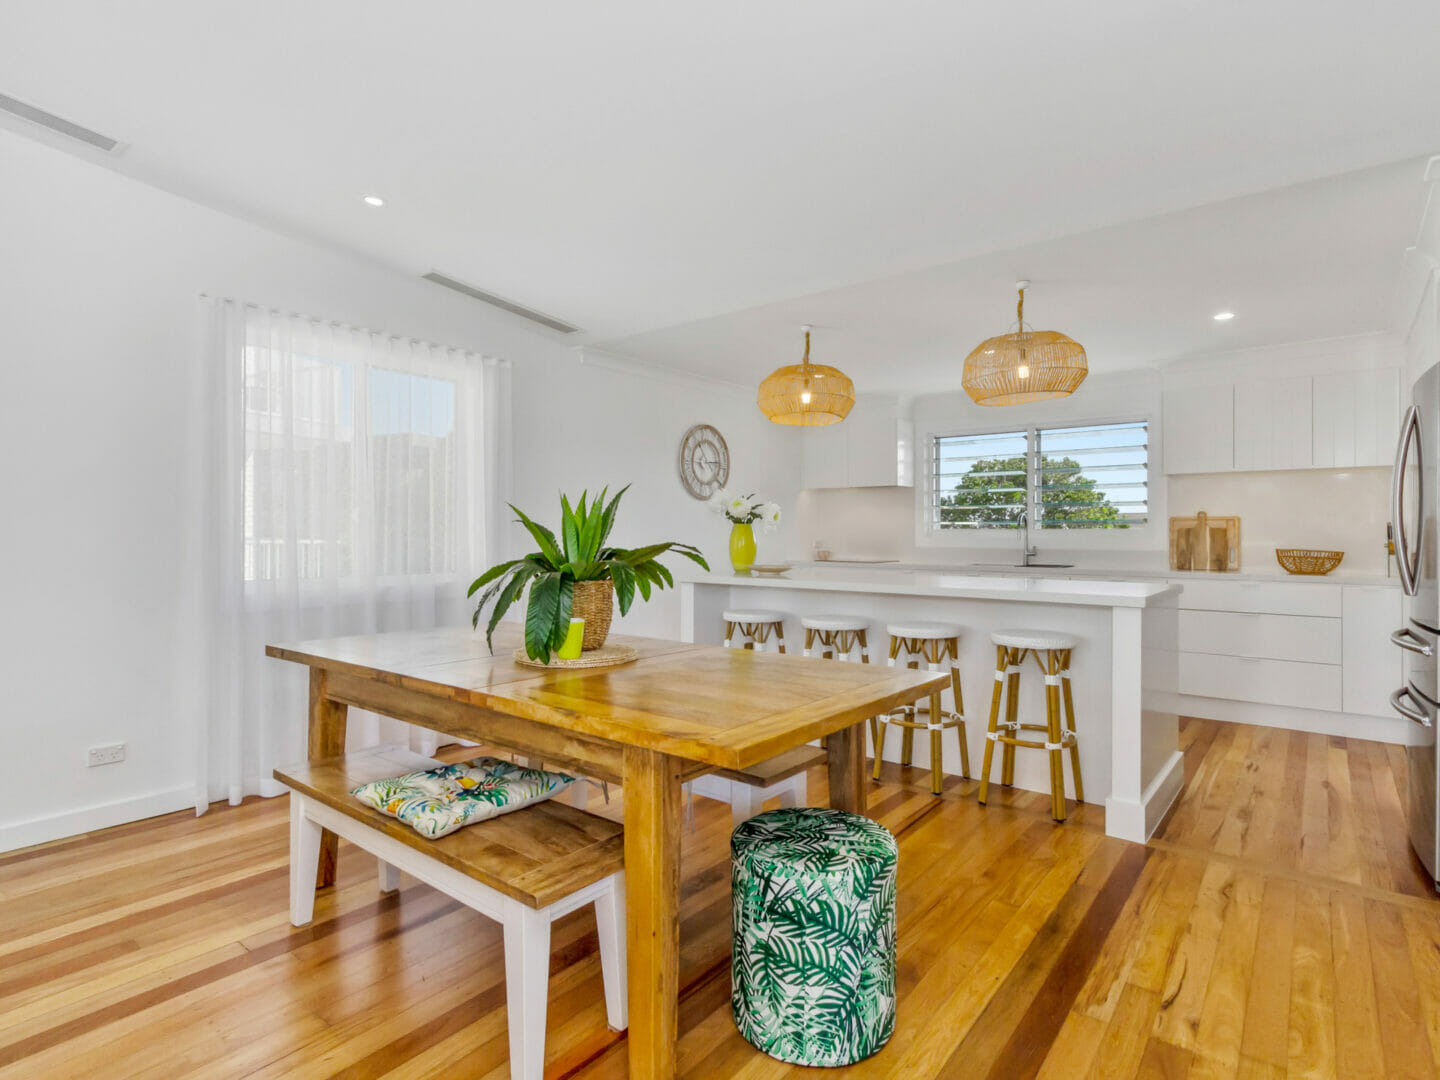 037 open2view id565821 162 marine parade kingscliff